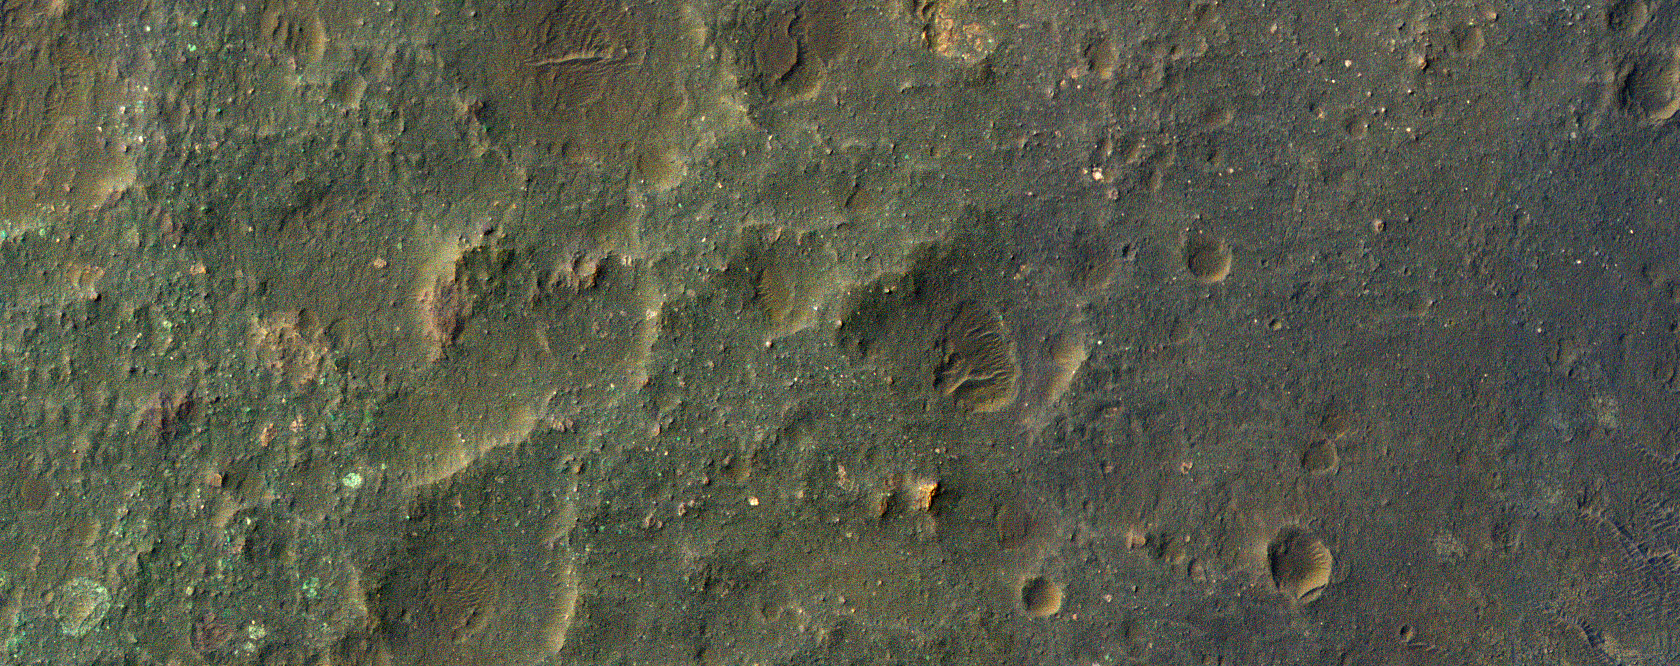 Megabreccia on the Floor of Luba Crater